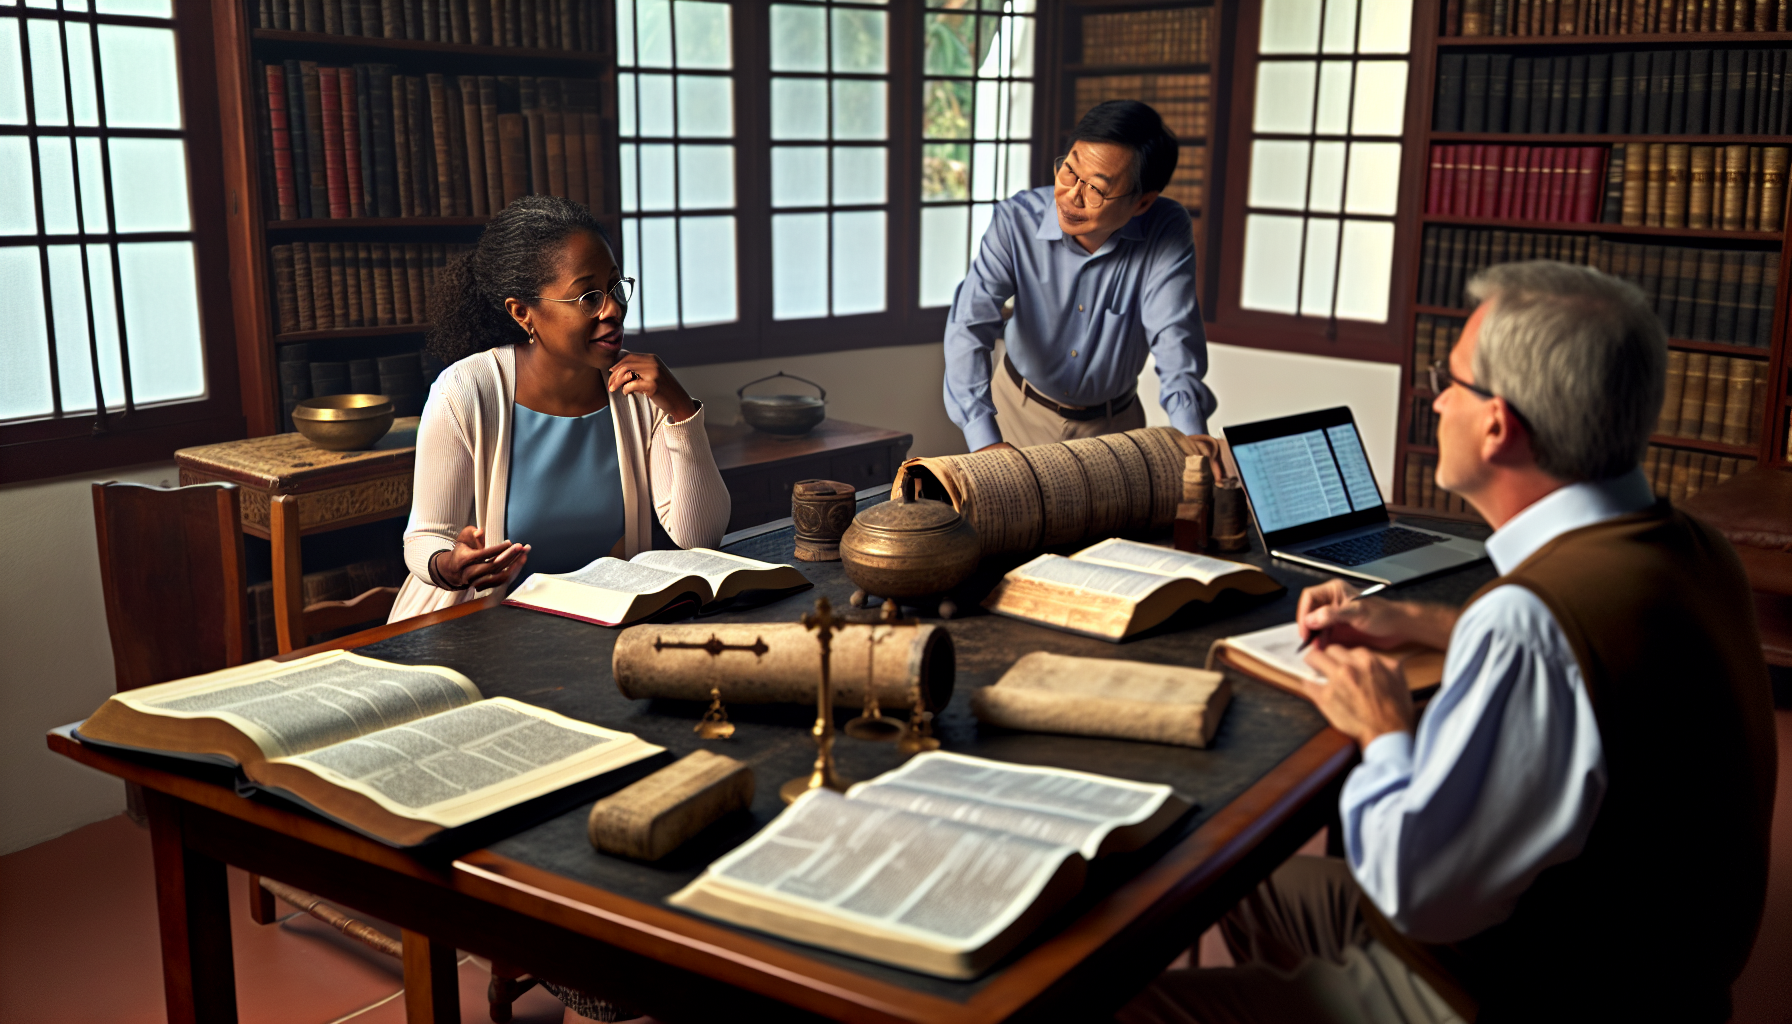 Consultation with biblical scholars and study tools for choosing Bible translations